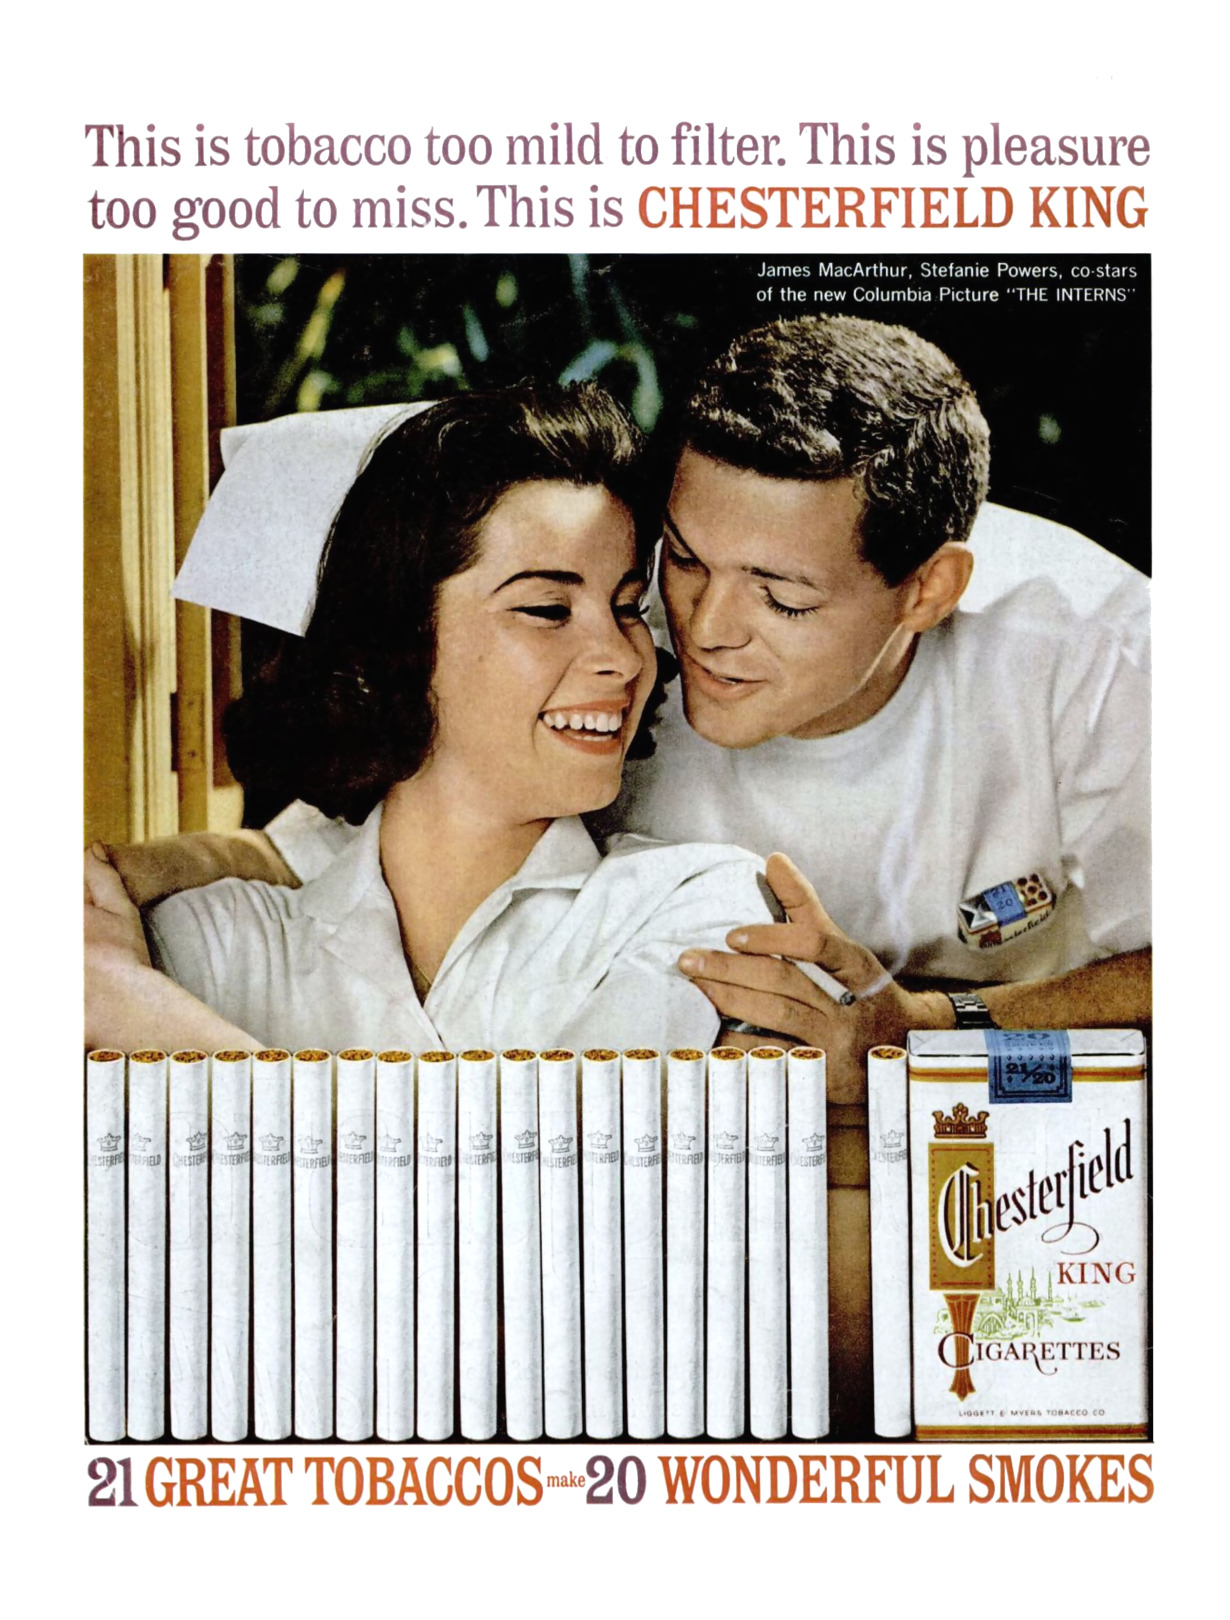 Chesterfield King Cigarettes featuring Stefanie Powers and James MacArthur - 1962